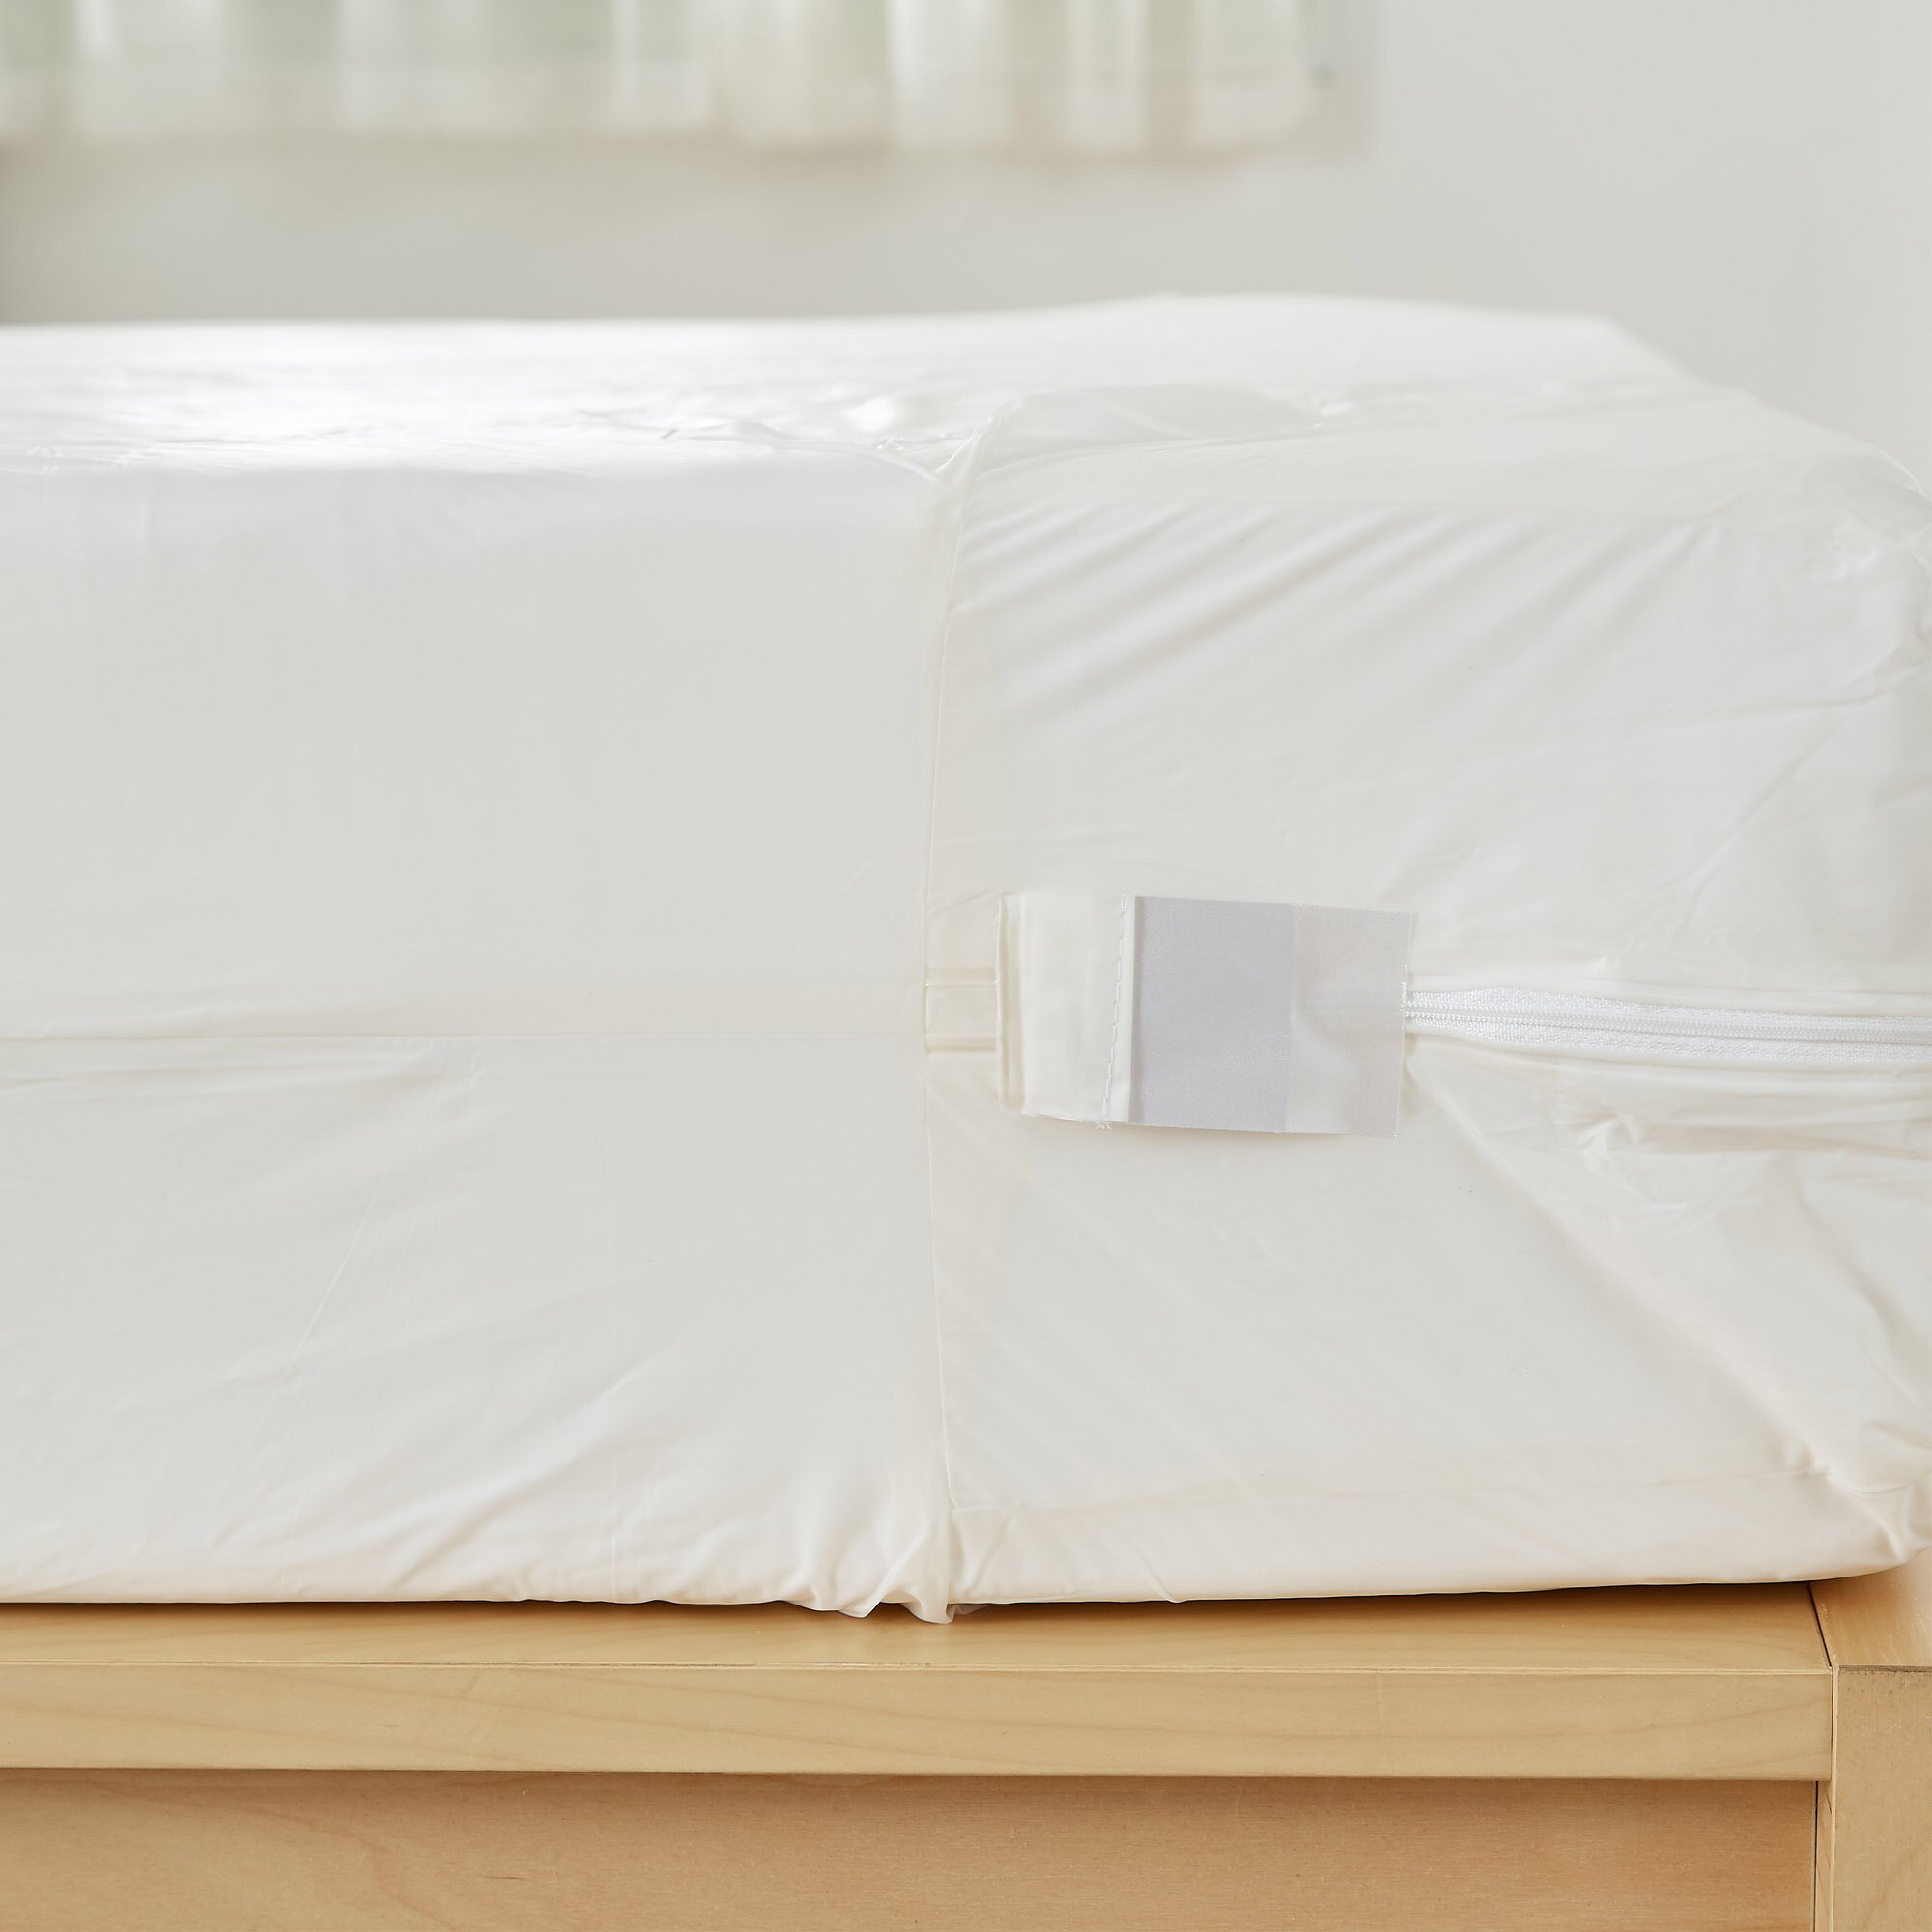 best bed bug proof mattress covers